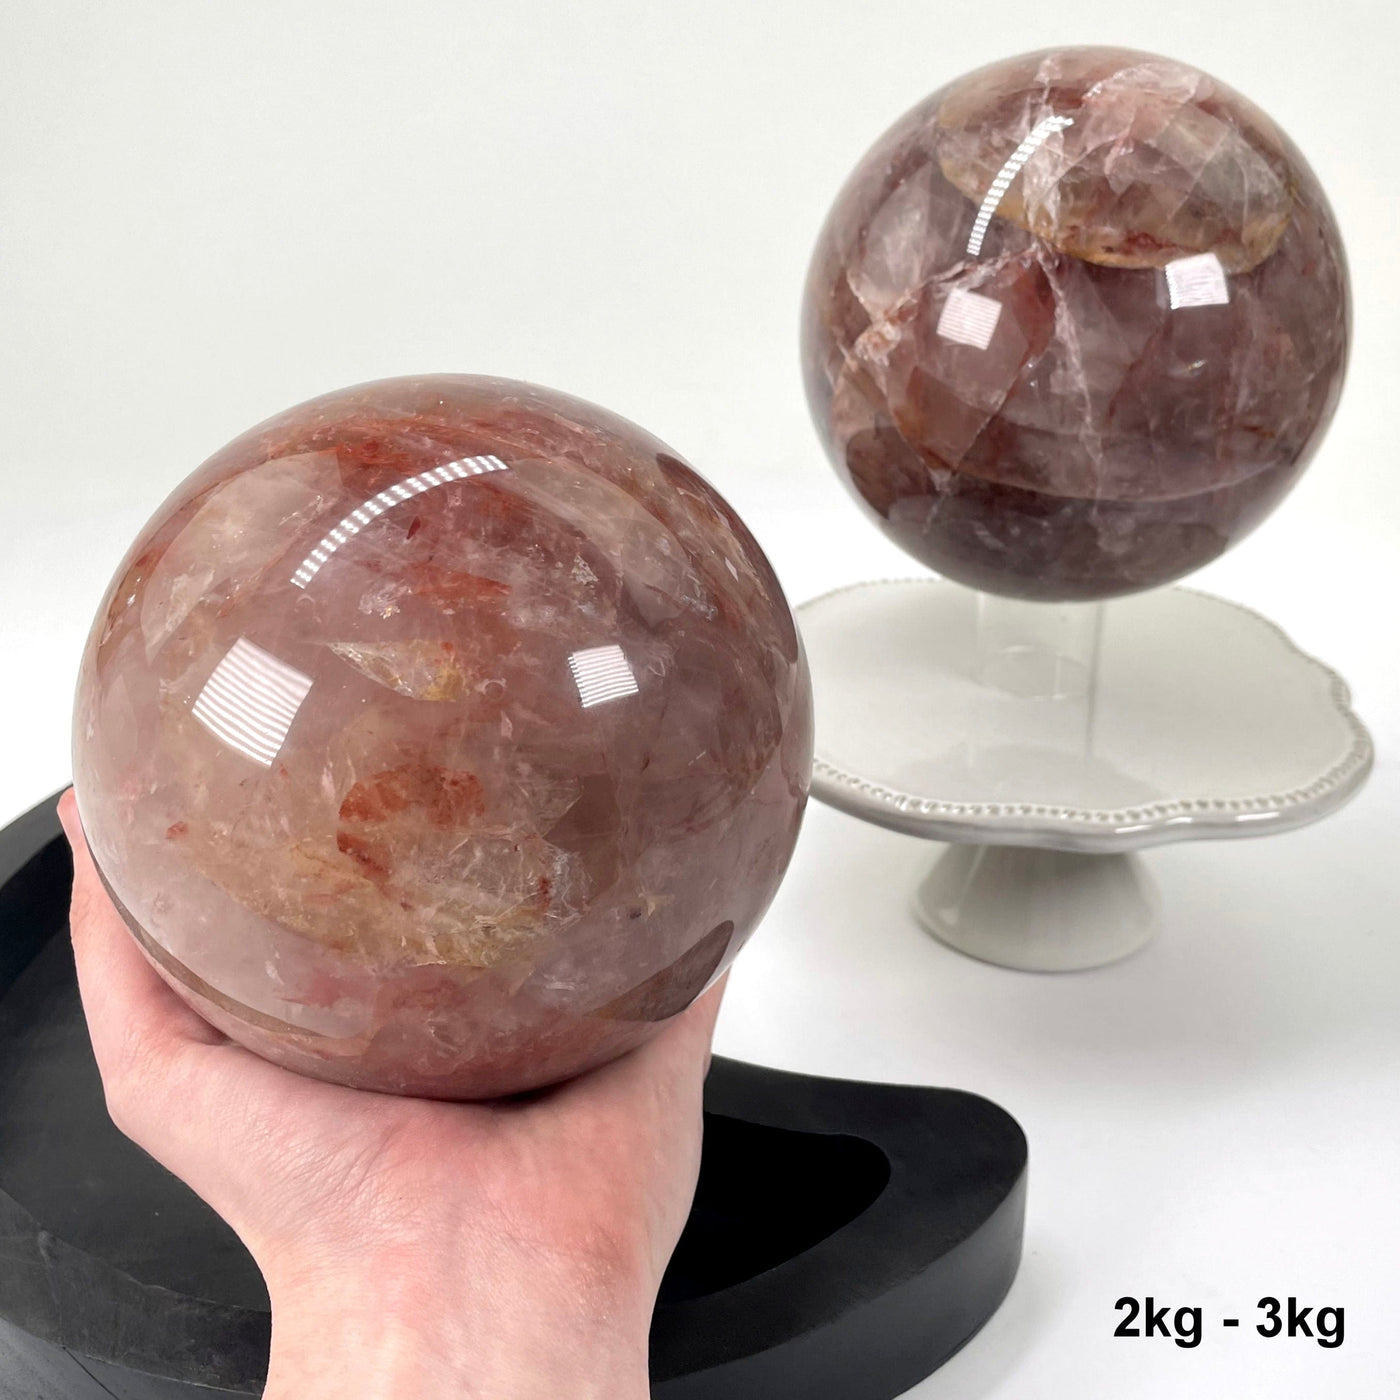 one 2kg - 3kg guava polished sphere in hand for size reference with one other in background display